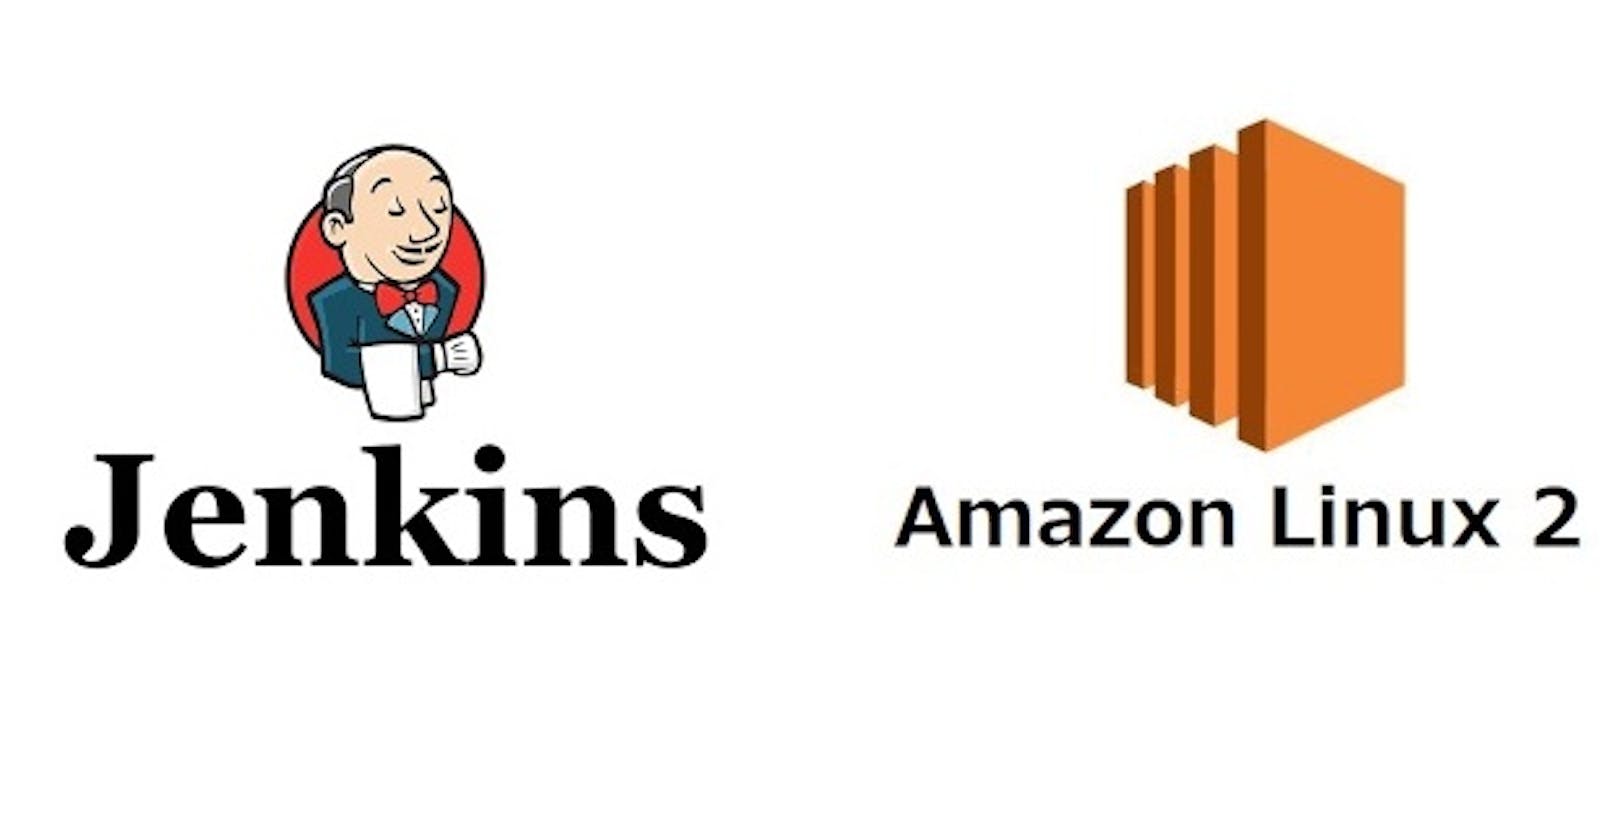 Step by Step guide to install Jenkins on Amazon Linux